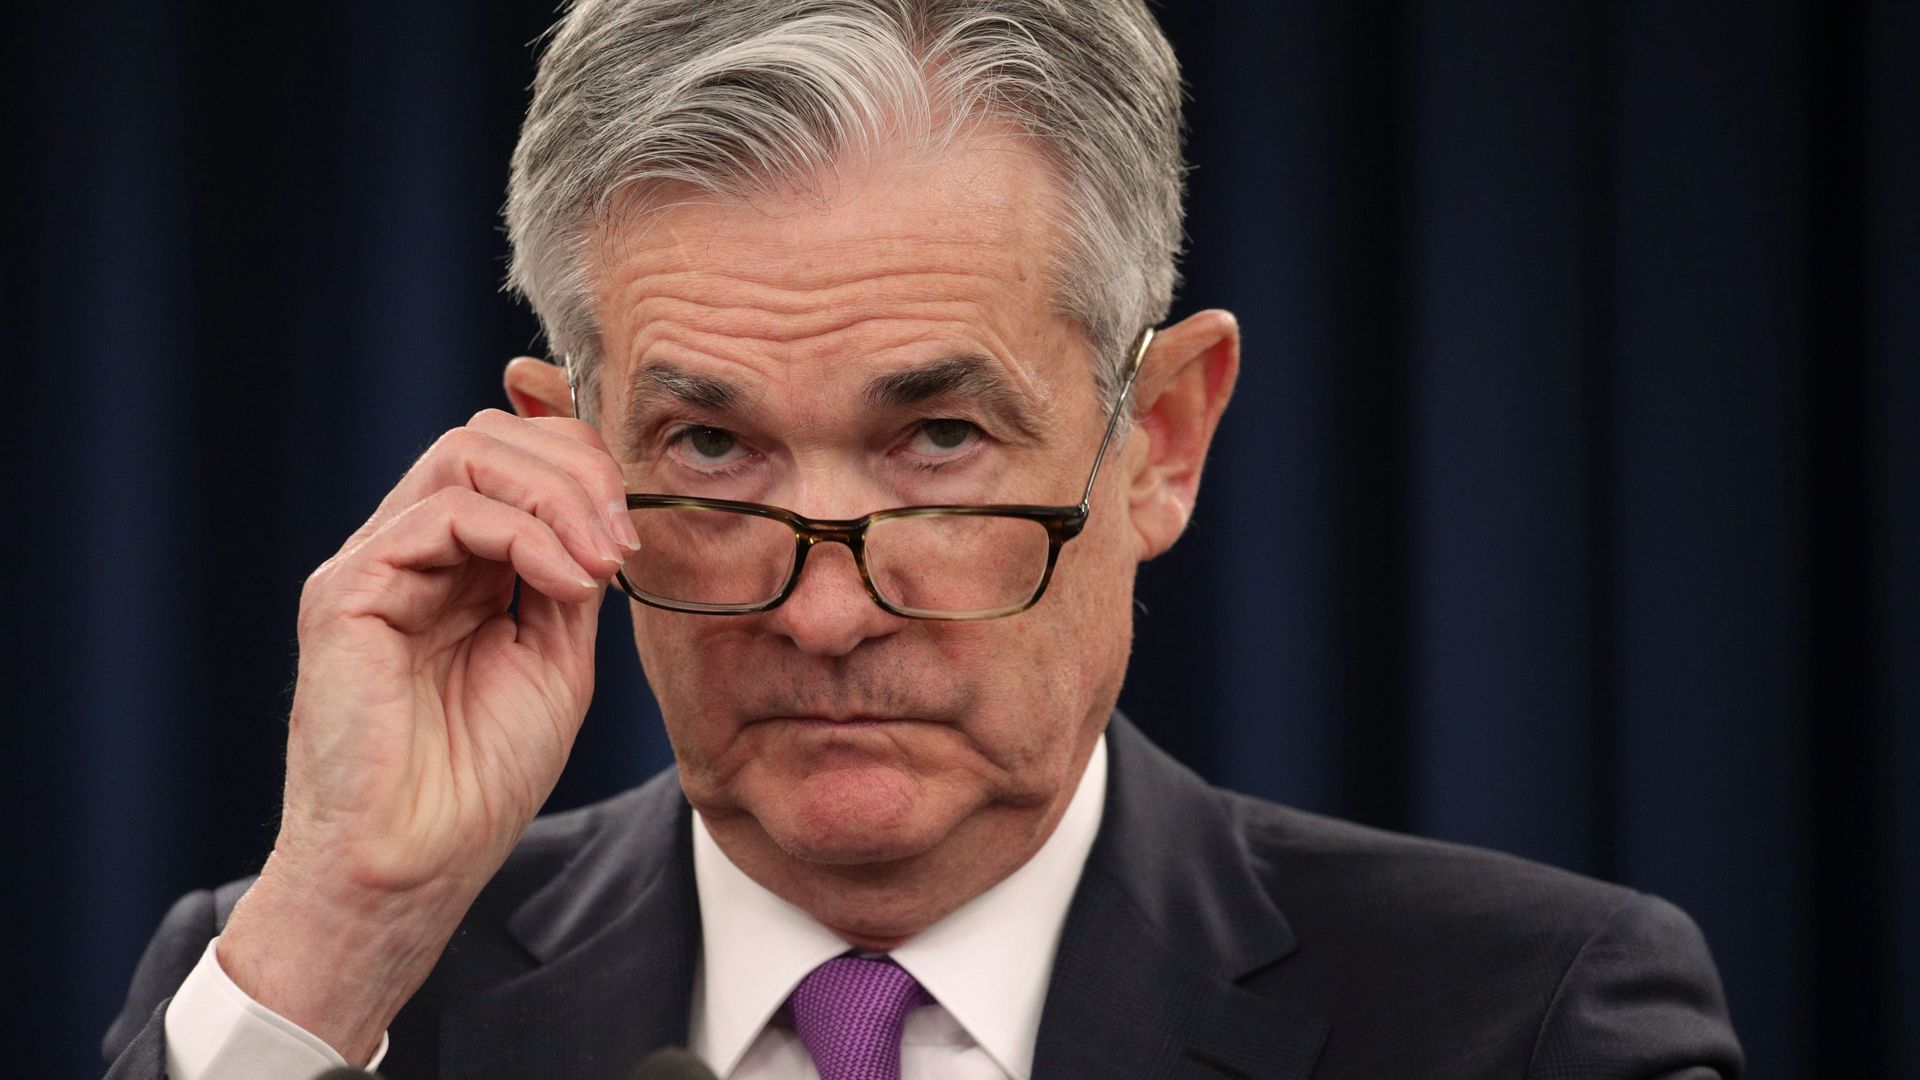 Federal Reserve Board Chairman Jerome Powell peers over his glasses during a news conference